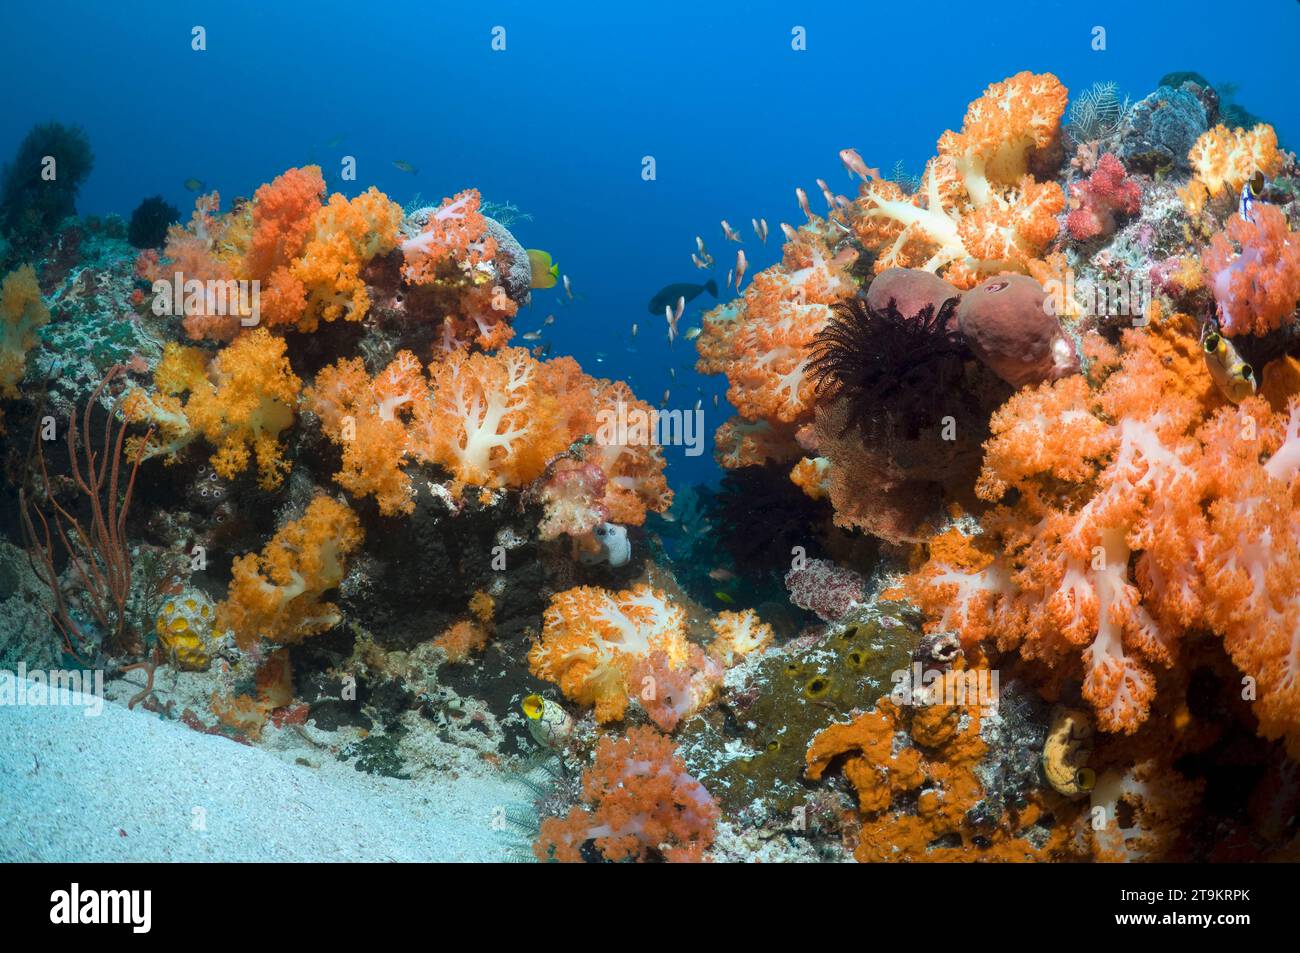 Coral reef scenery with soft corals (Scleronephthya sp.).  Komodo National Park, Indonesia. Stock Photo